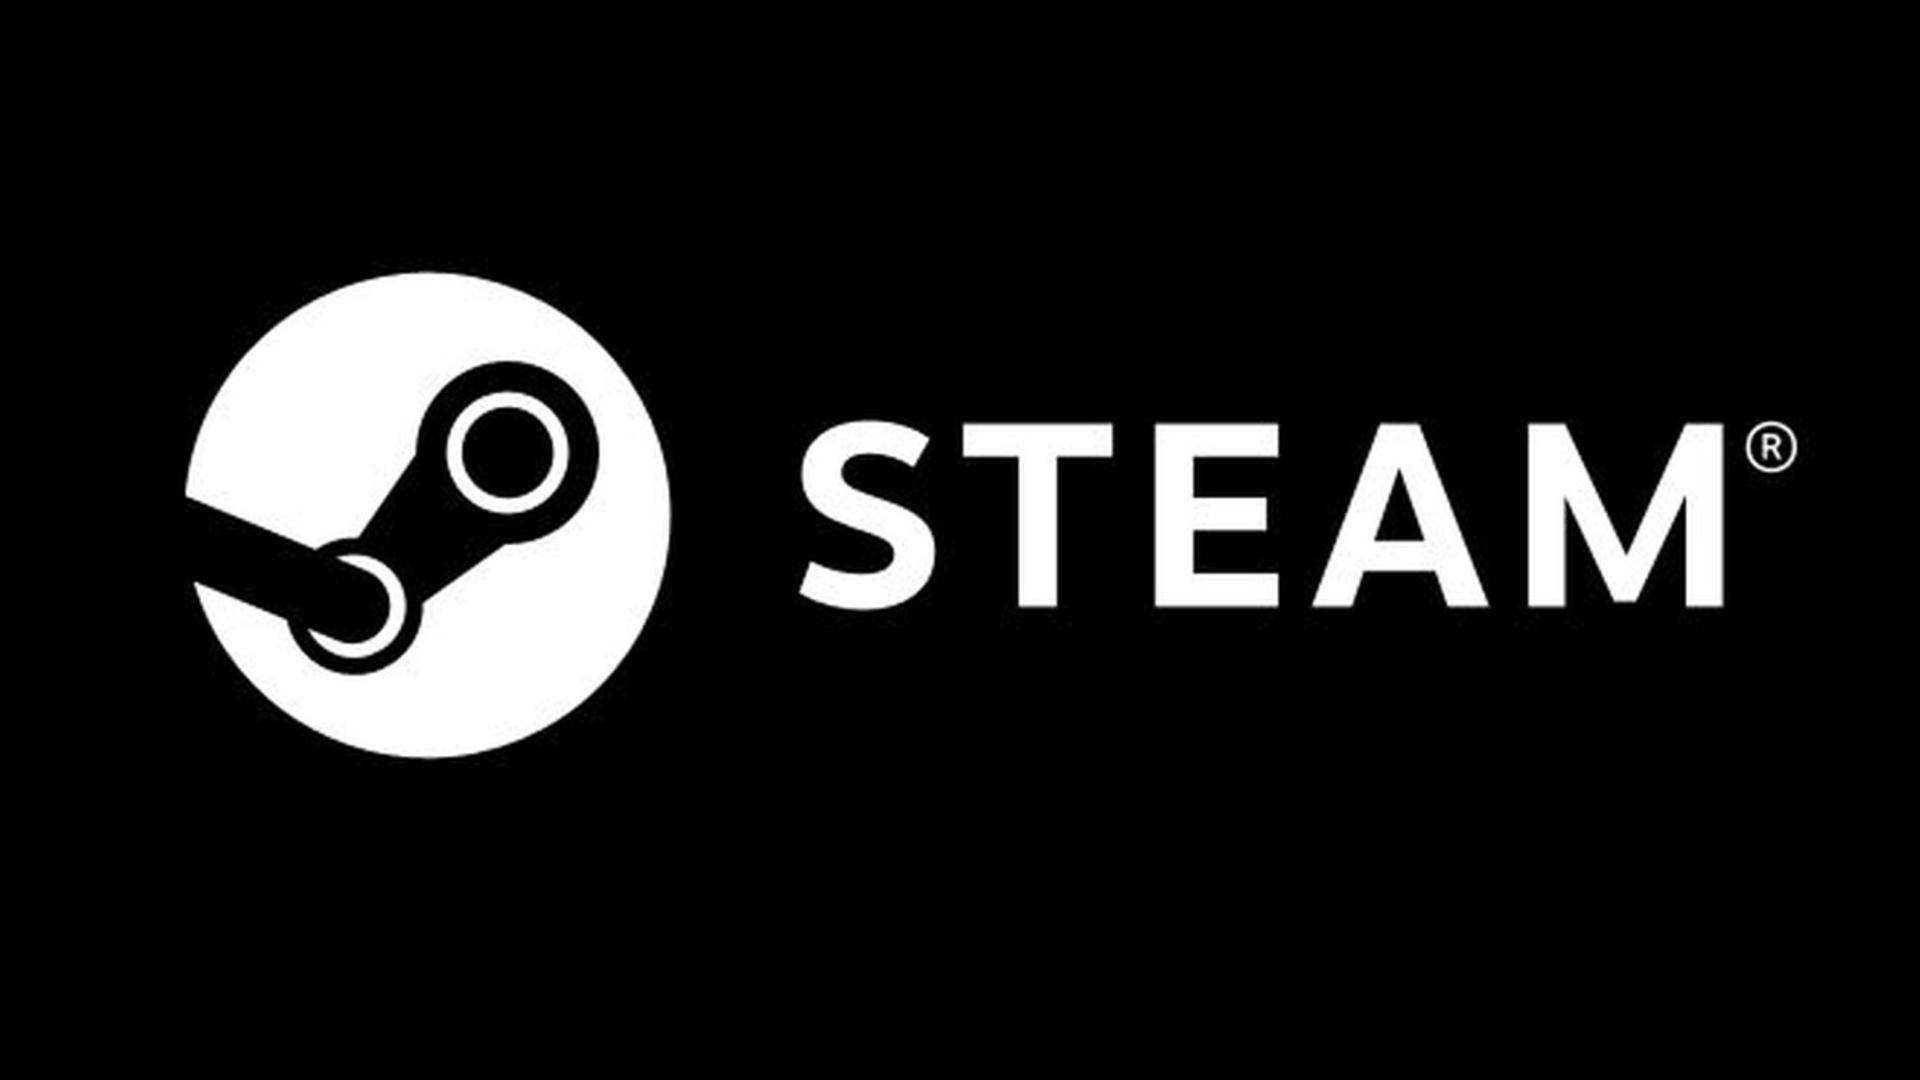 All steam icons gone фото 77